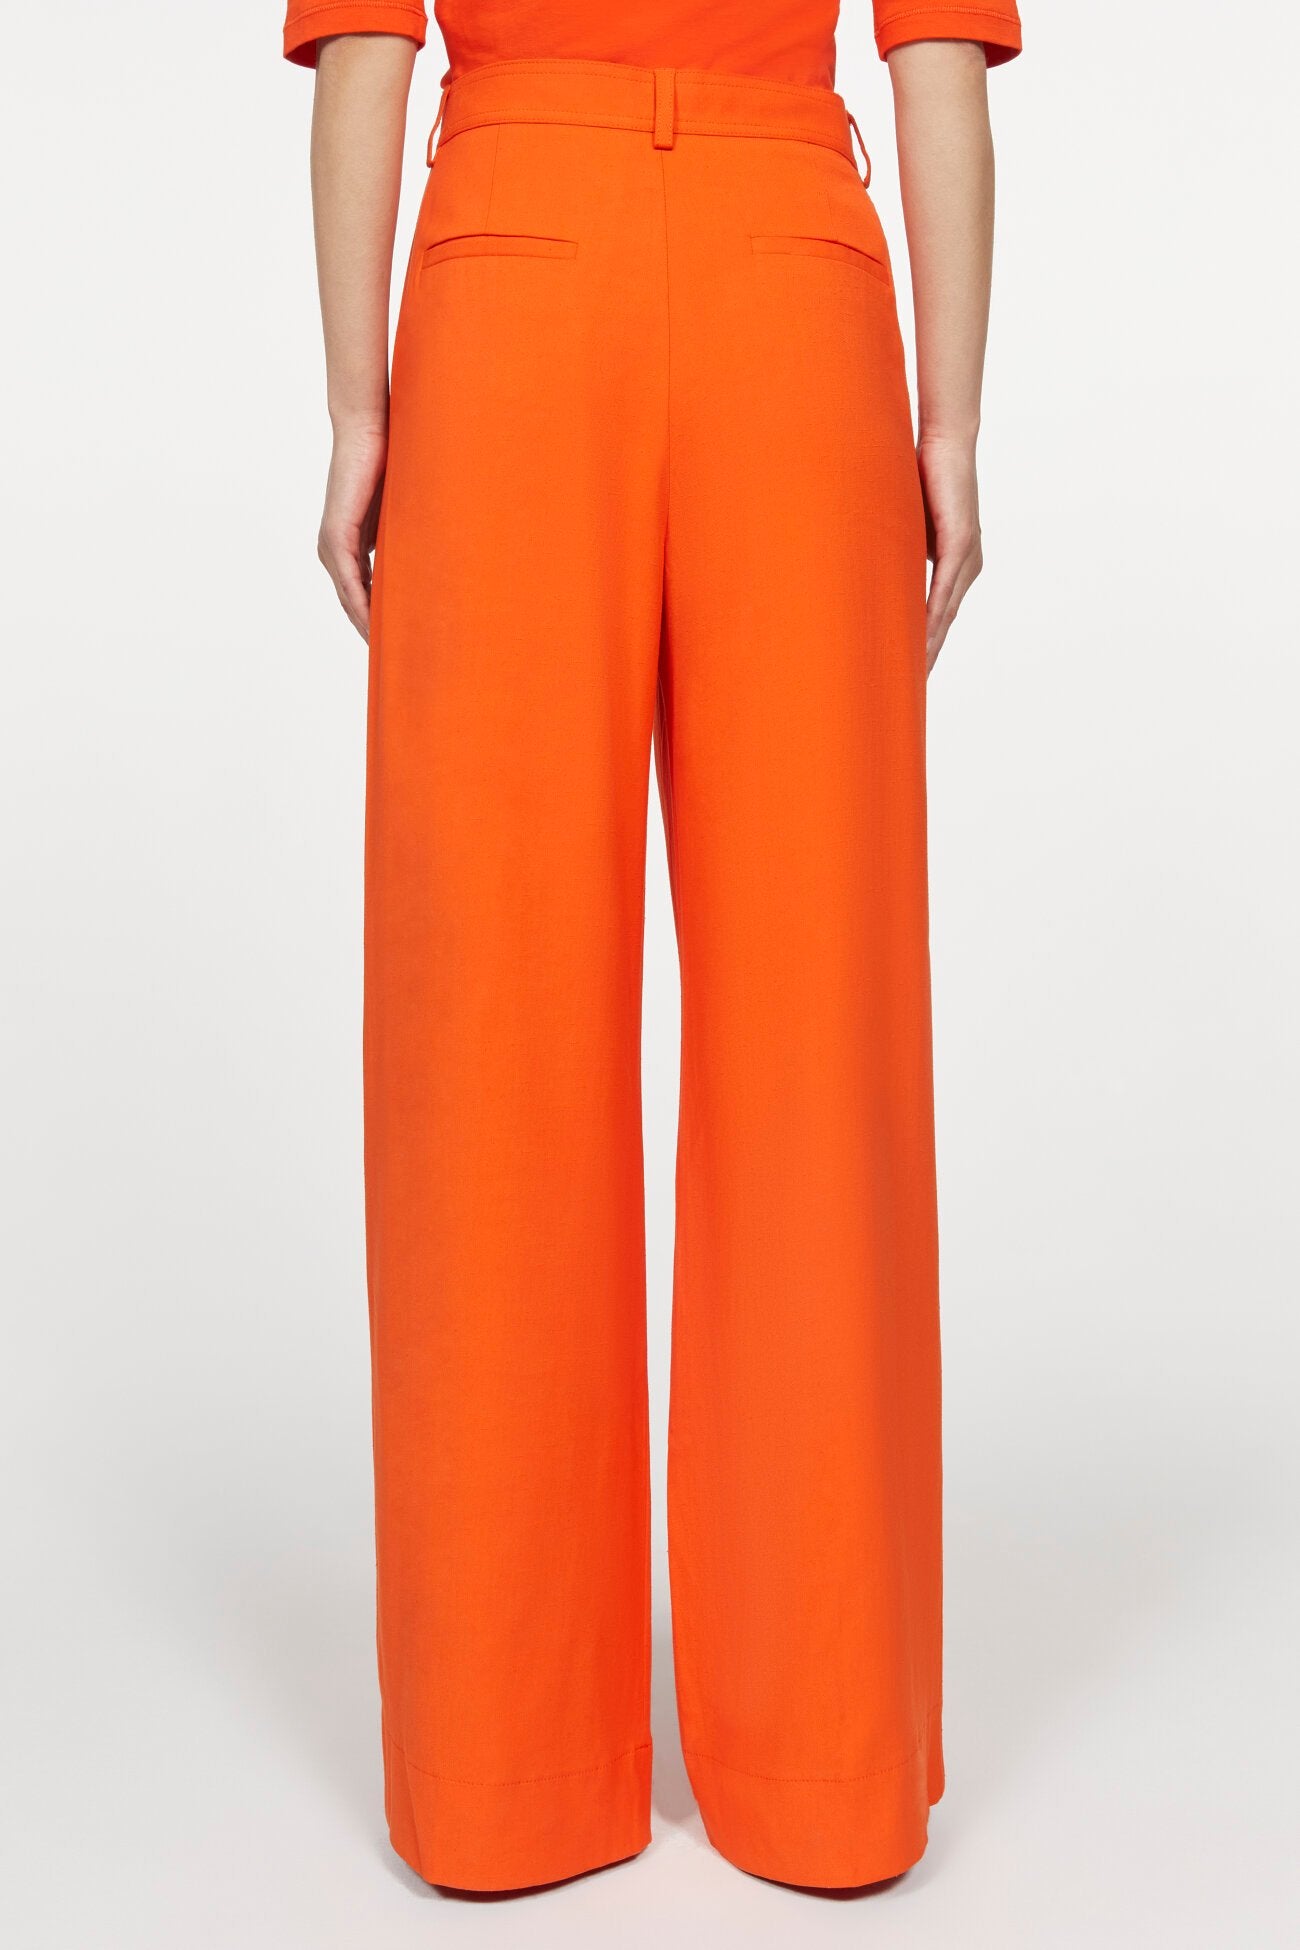 Addie Wide Pants in Cherry Tomato by Rodebjer http://www.shoprecital.com